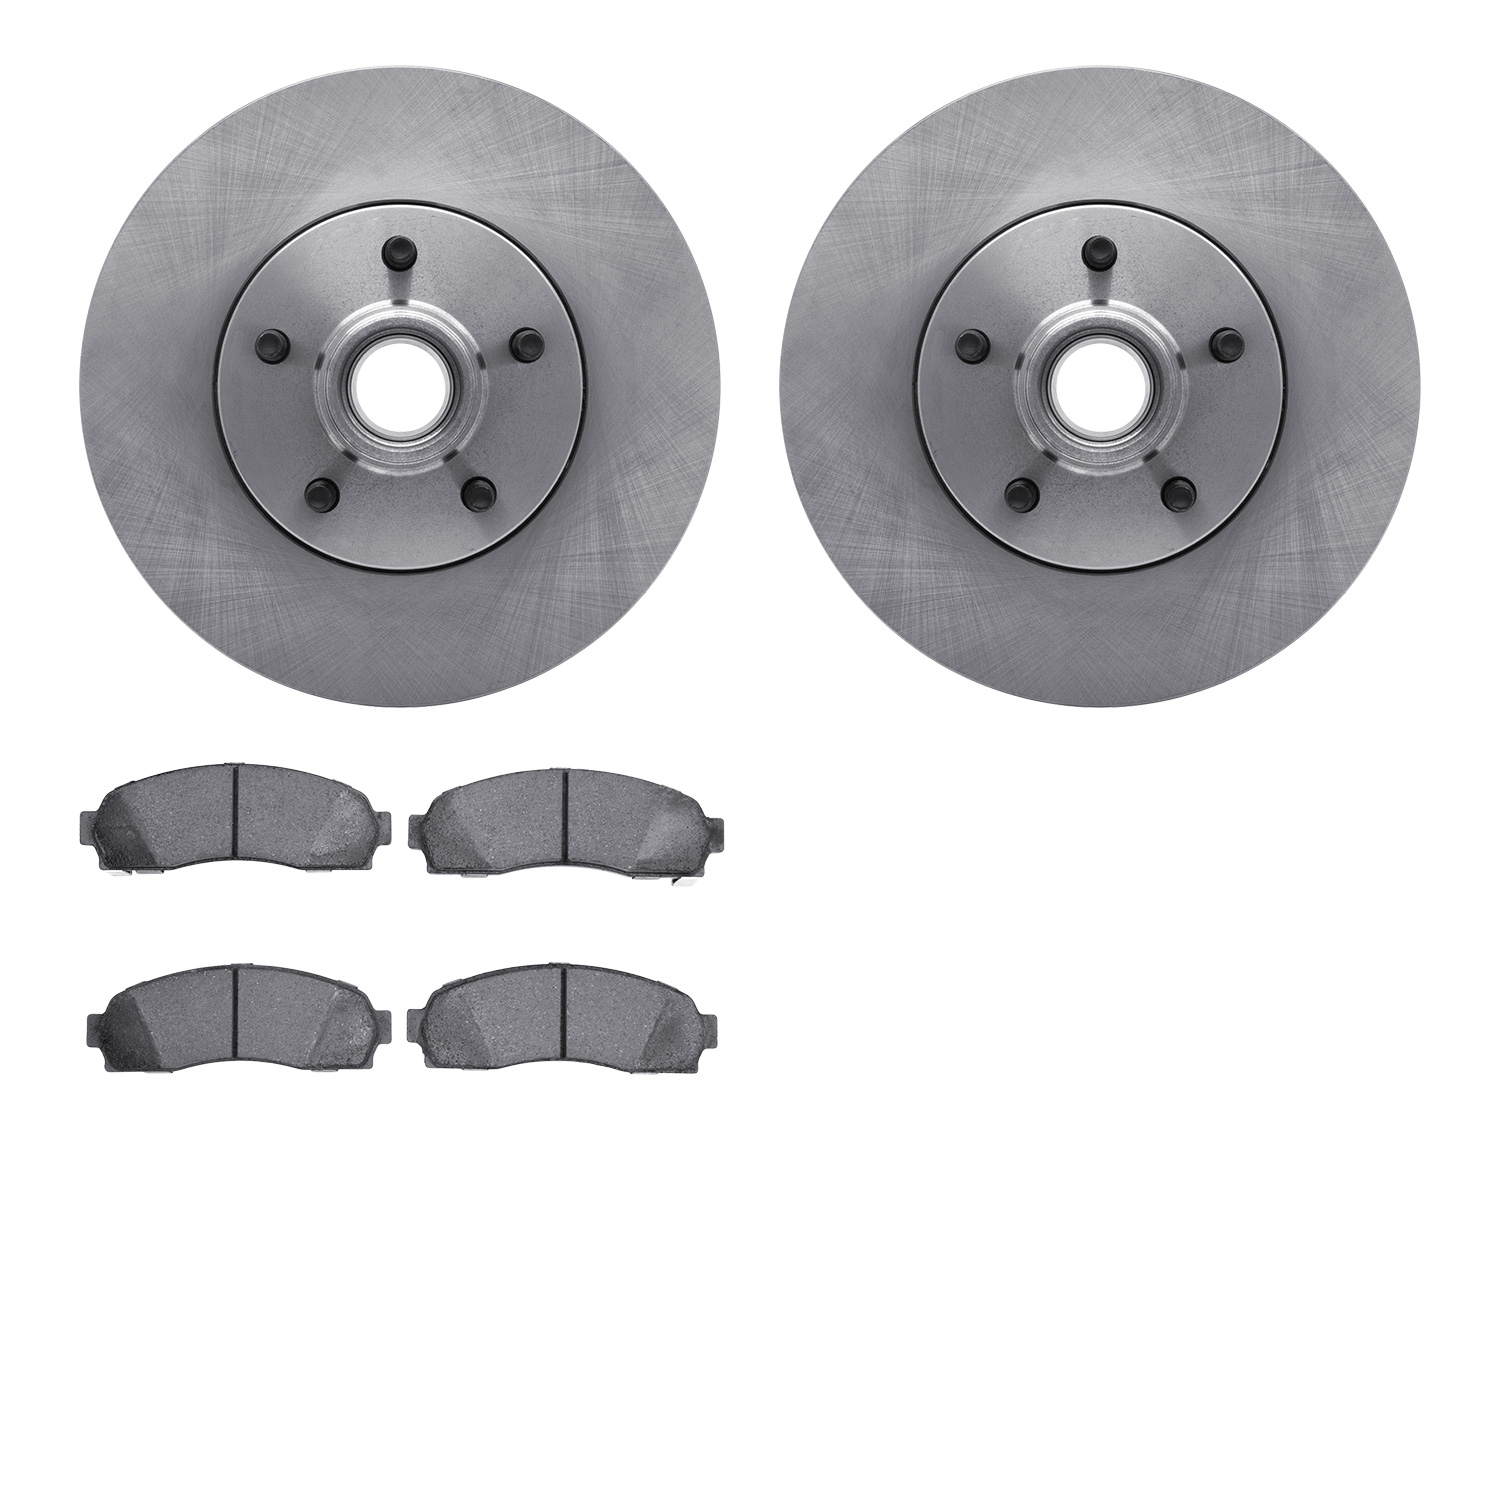 6402-92010 Brake Rotors with Ultimate-Duty Brake Pads, 2006-2012 Ford/Lincoln/Mercury/Mazda, Position: Front